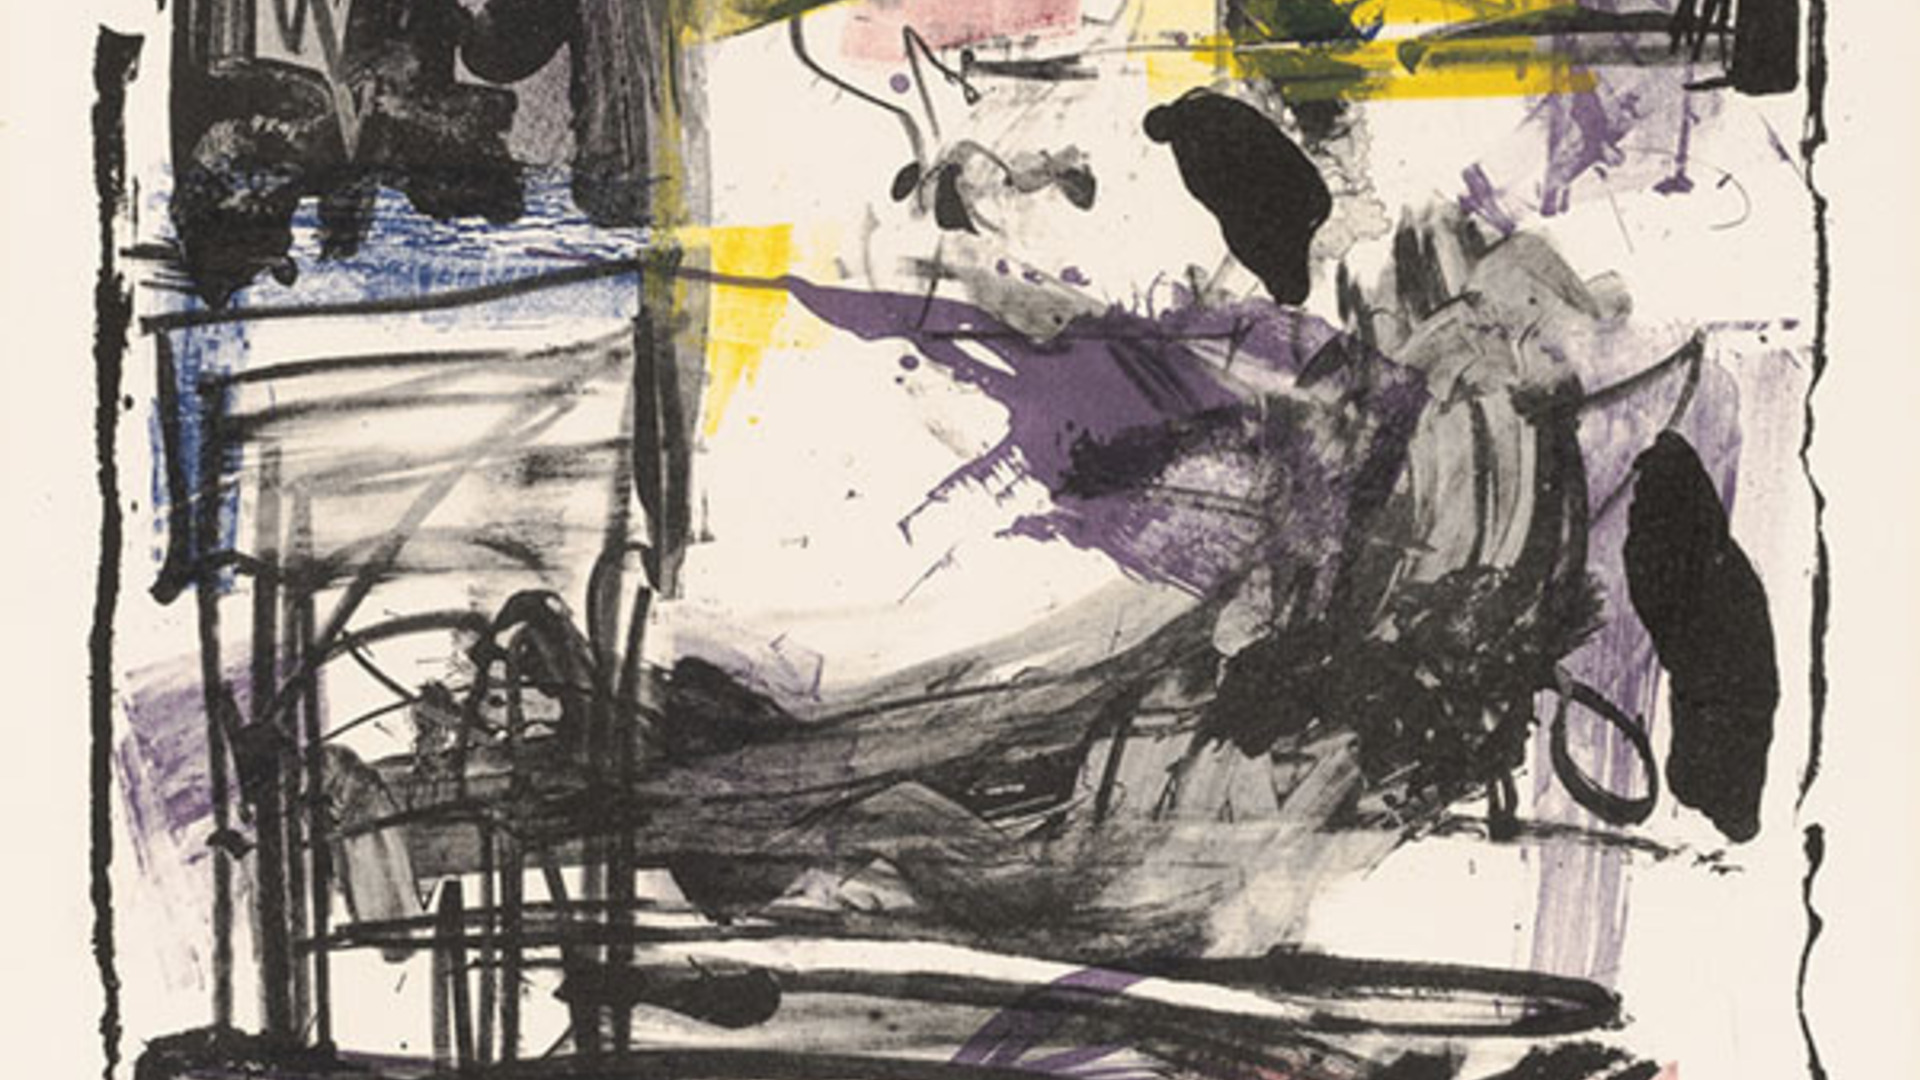 Grace Hartigan (American, 1922–2008), Pallas Athene, 1961, lithograph, 30.13 x 22.25 inches. Acquired with funds from the Humana Foundation Endowment for American Art, 2008.033. Reproduced with the permission of the Grace Hartigan Estate